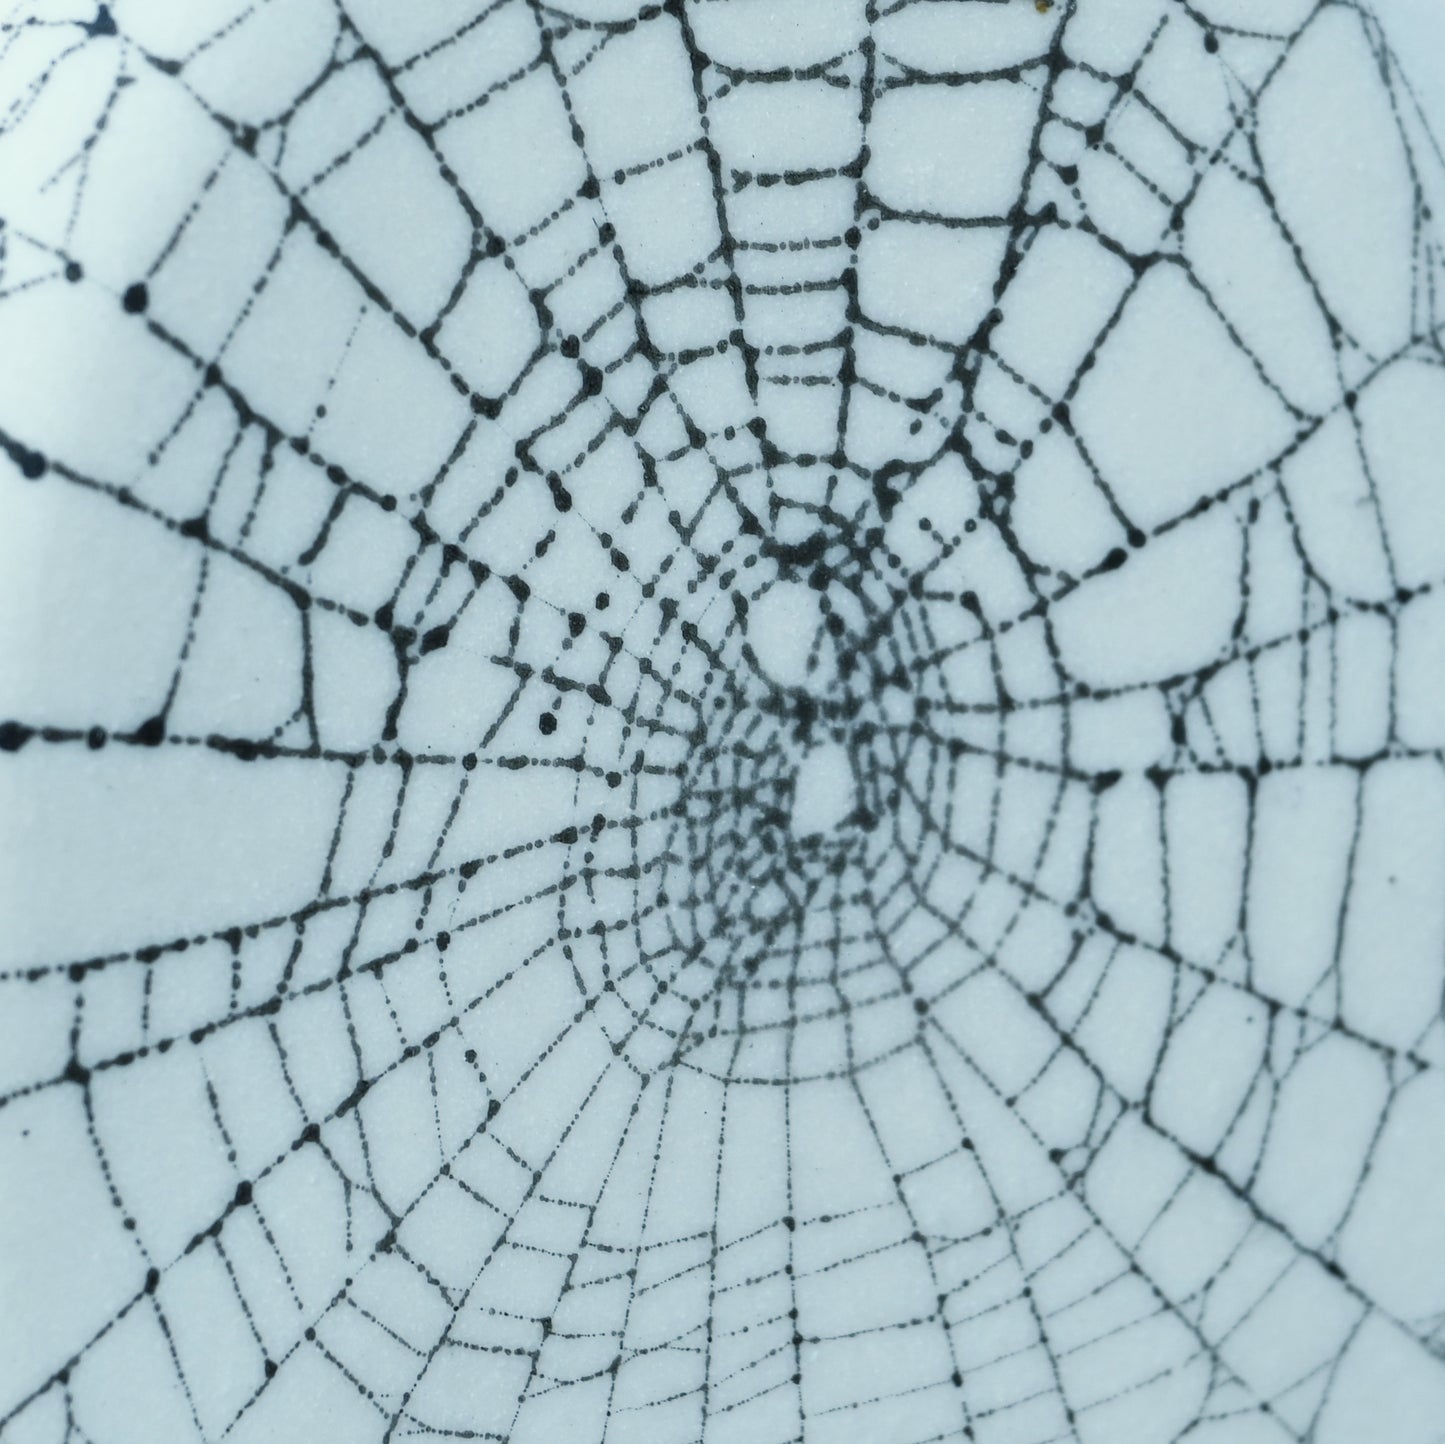 Web on Clay (155), Collected August 31, 2022